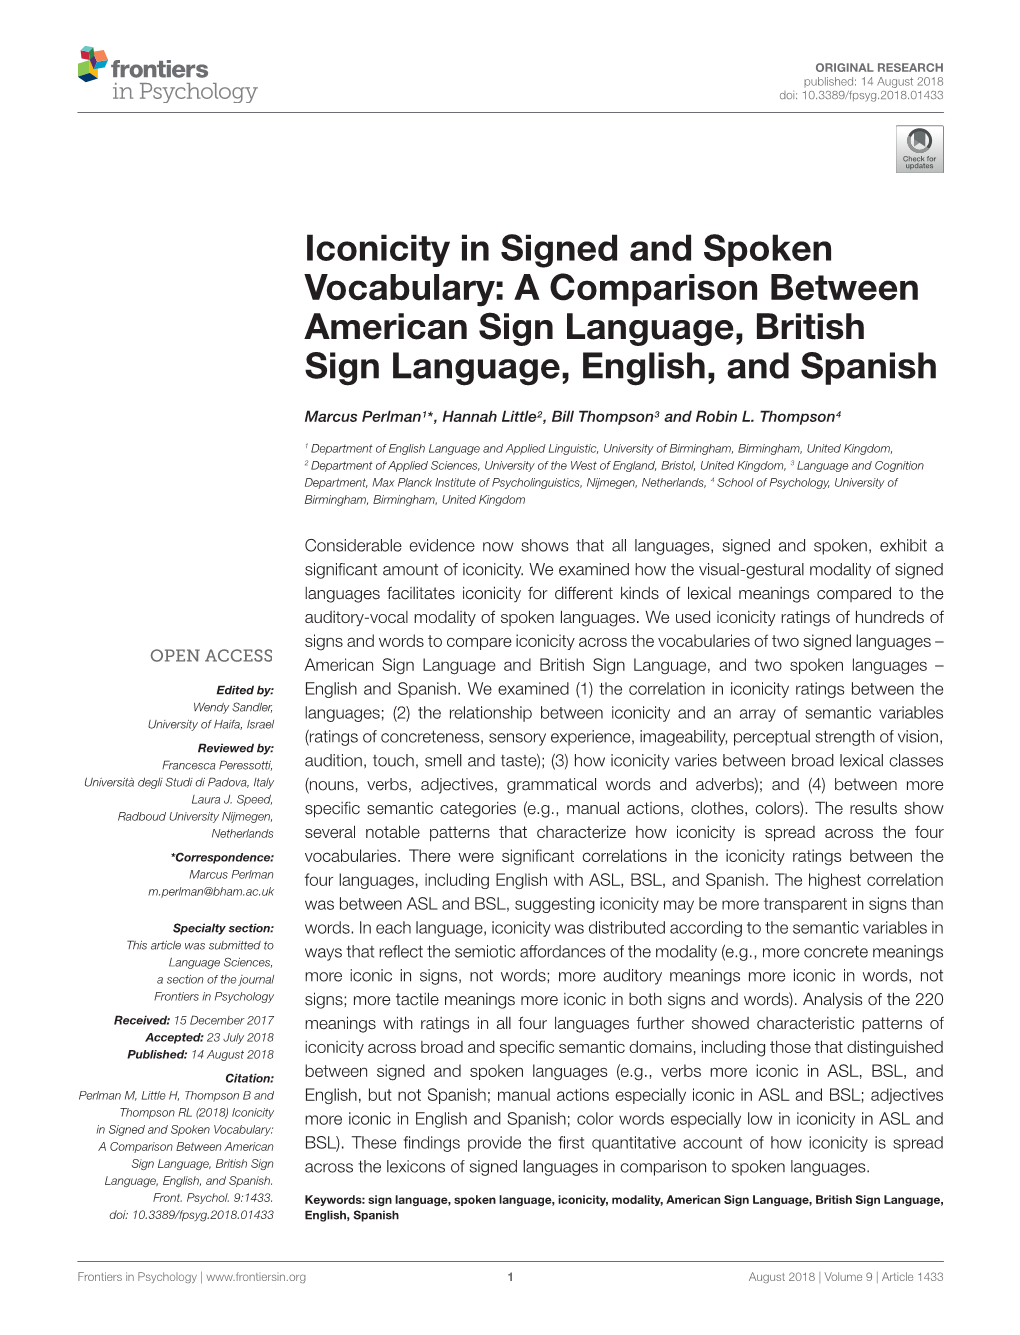 Iconicity in Signed and Spoken Vocabulary: a Comparison Between American Sign Language, British Sign Language, English, and Spanish